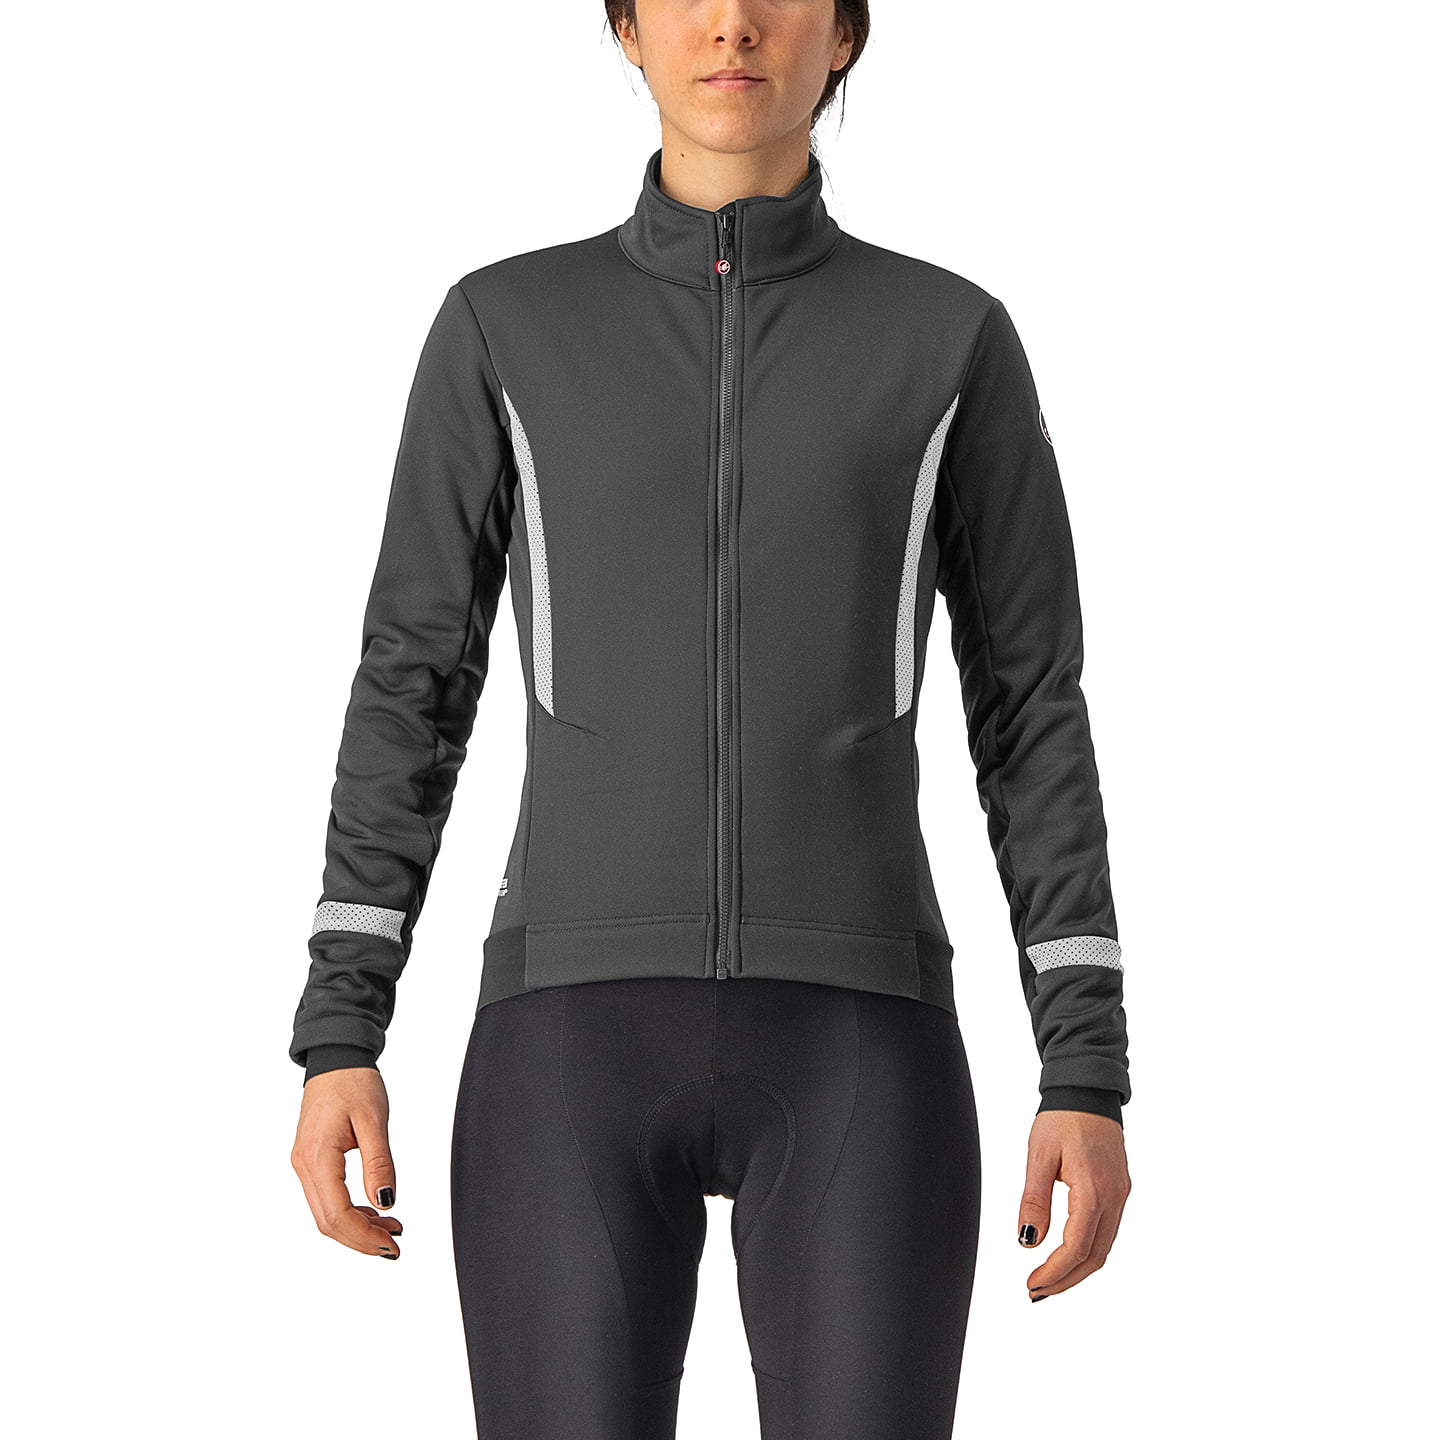 CASTELLI Dinamica 2 Women’s Winter Jacket Women’s Thermal Jacket, size XL, Winter jacket, Cycling clothes